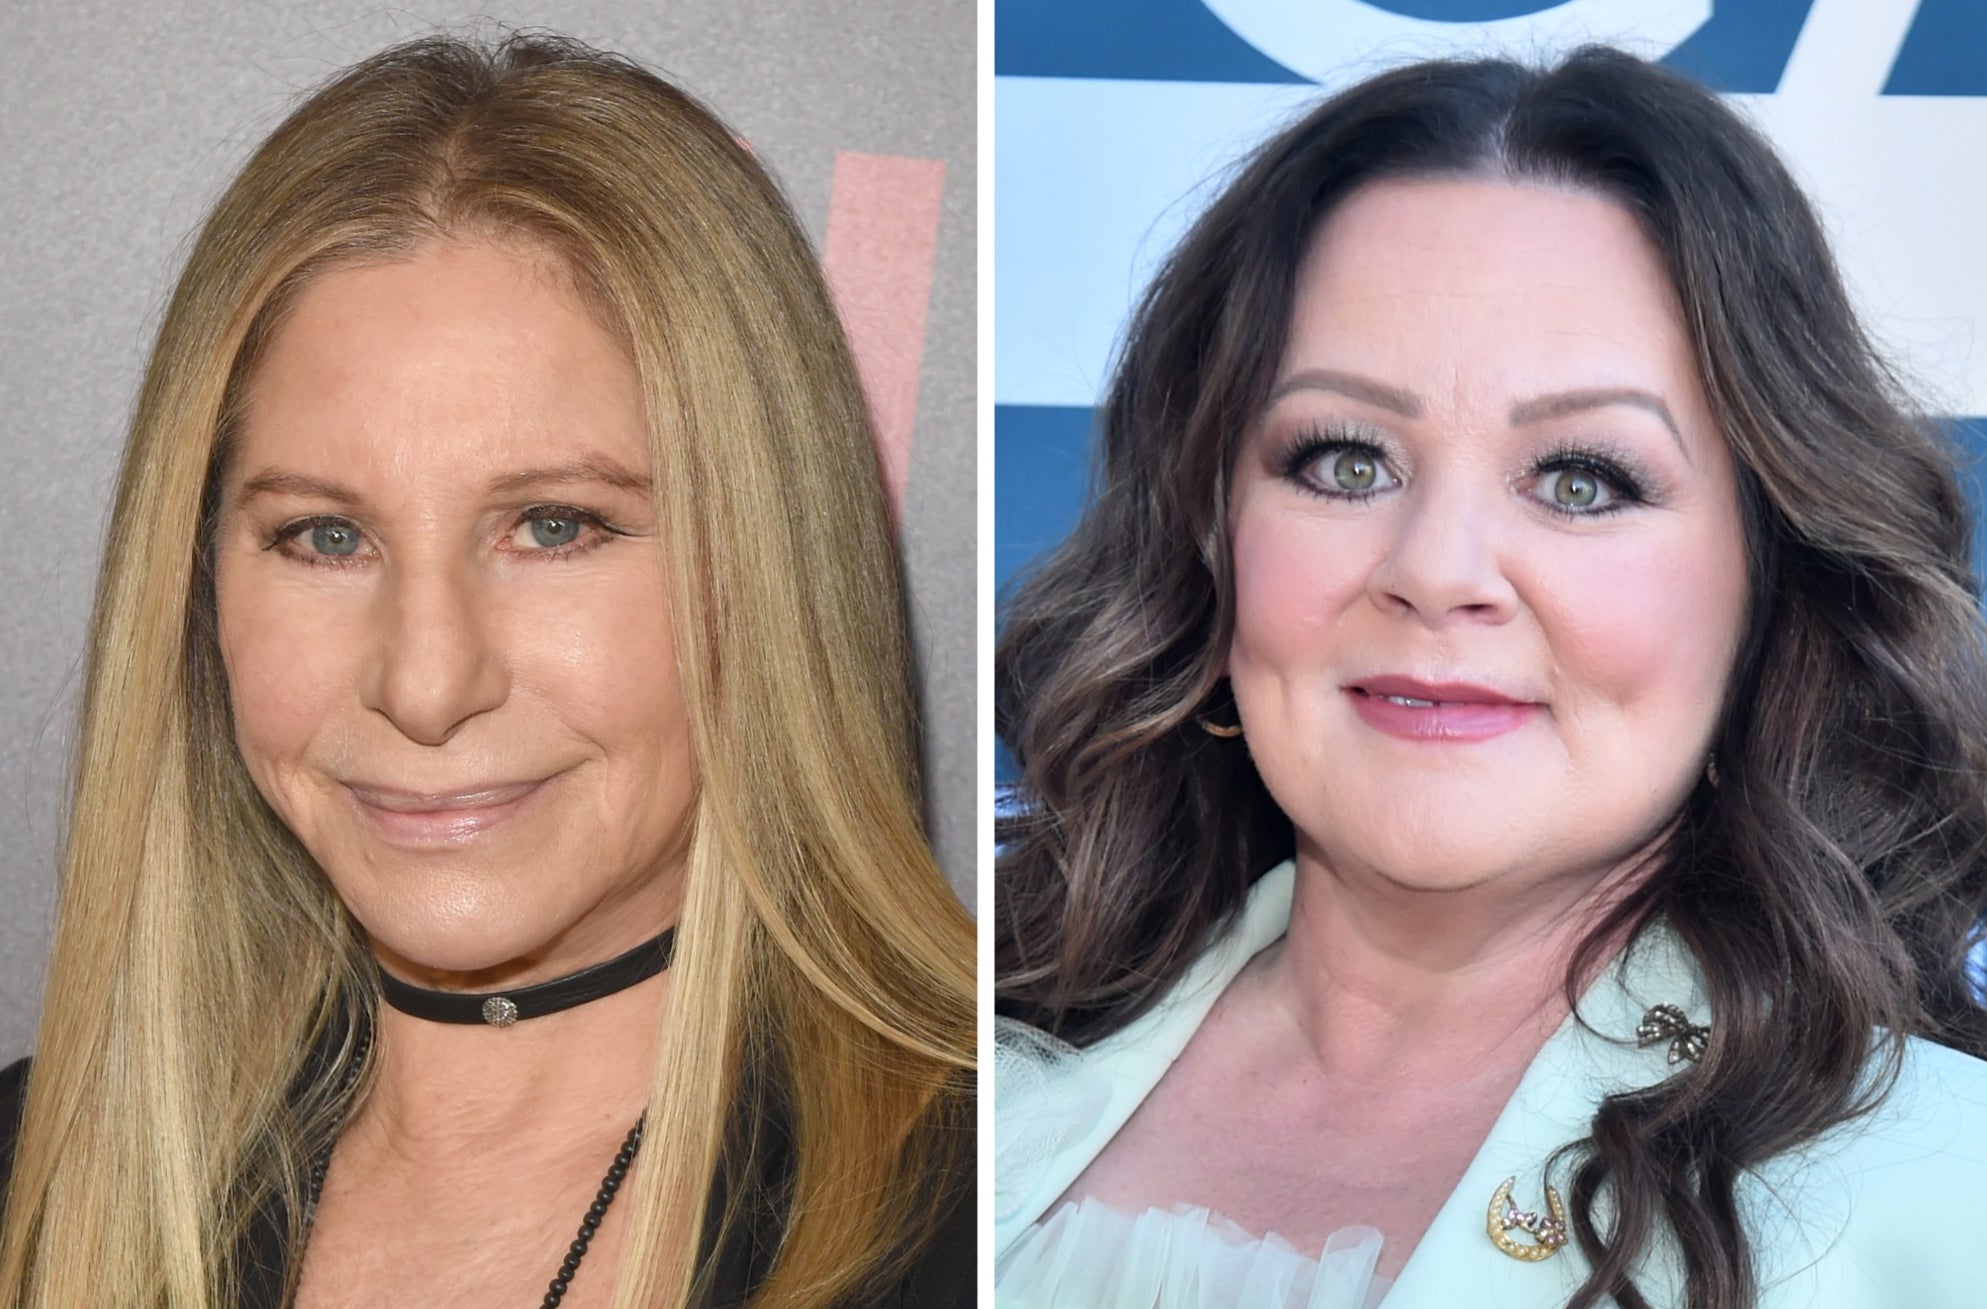 Streisand asked McCarthy if she had been taking weight-loss drug Ozempic